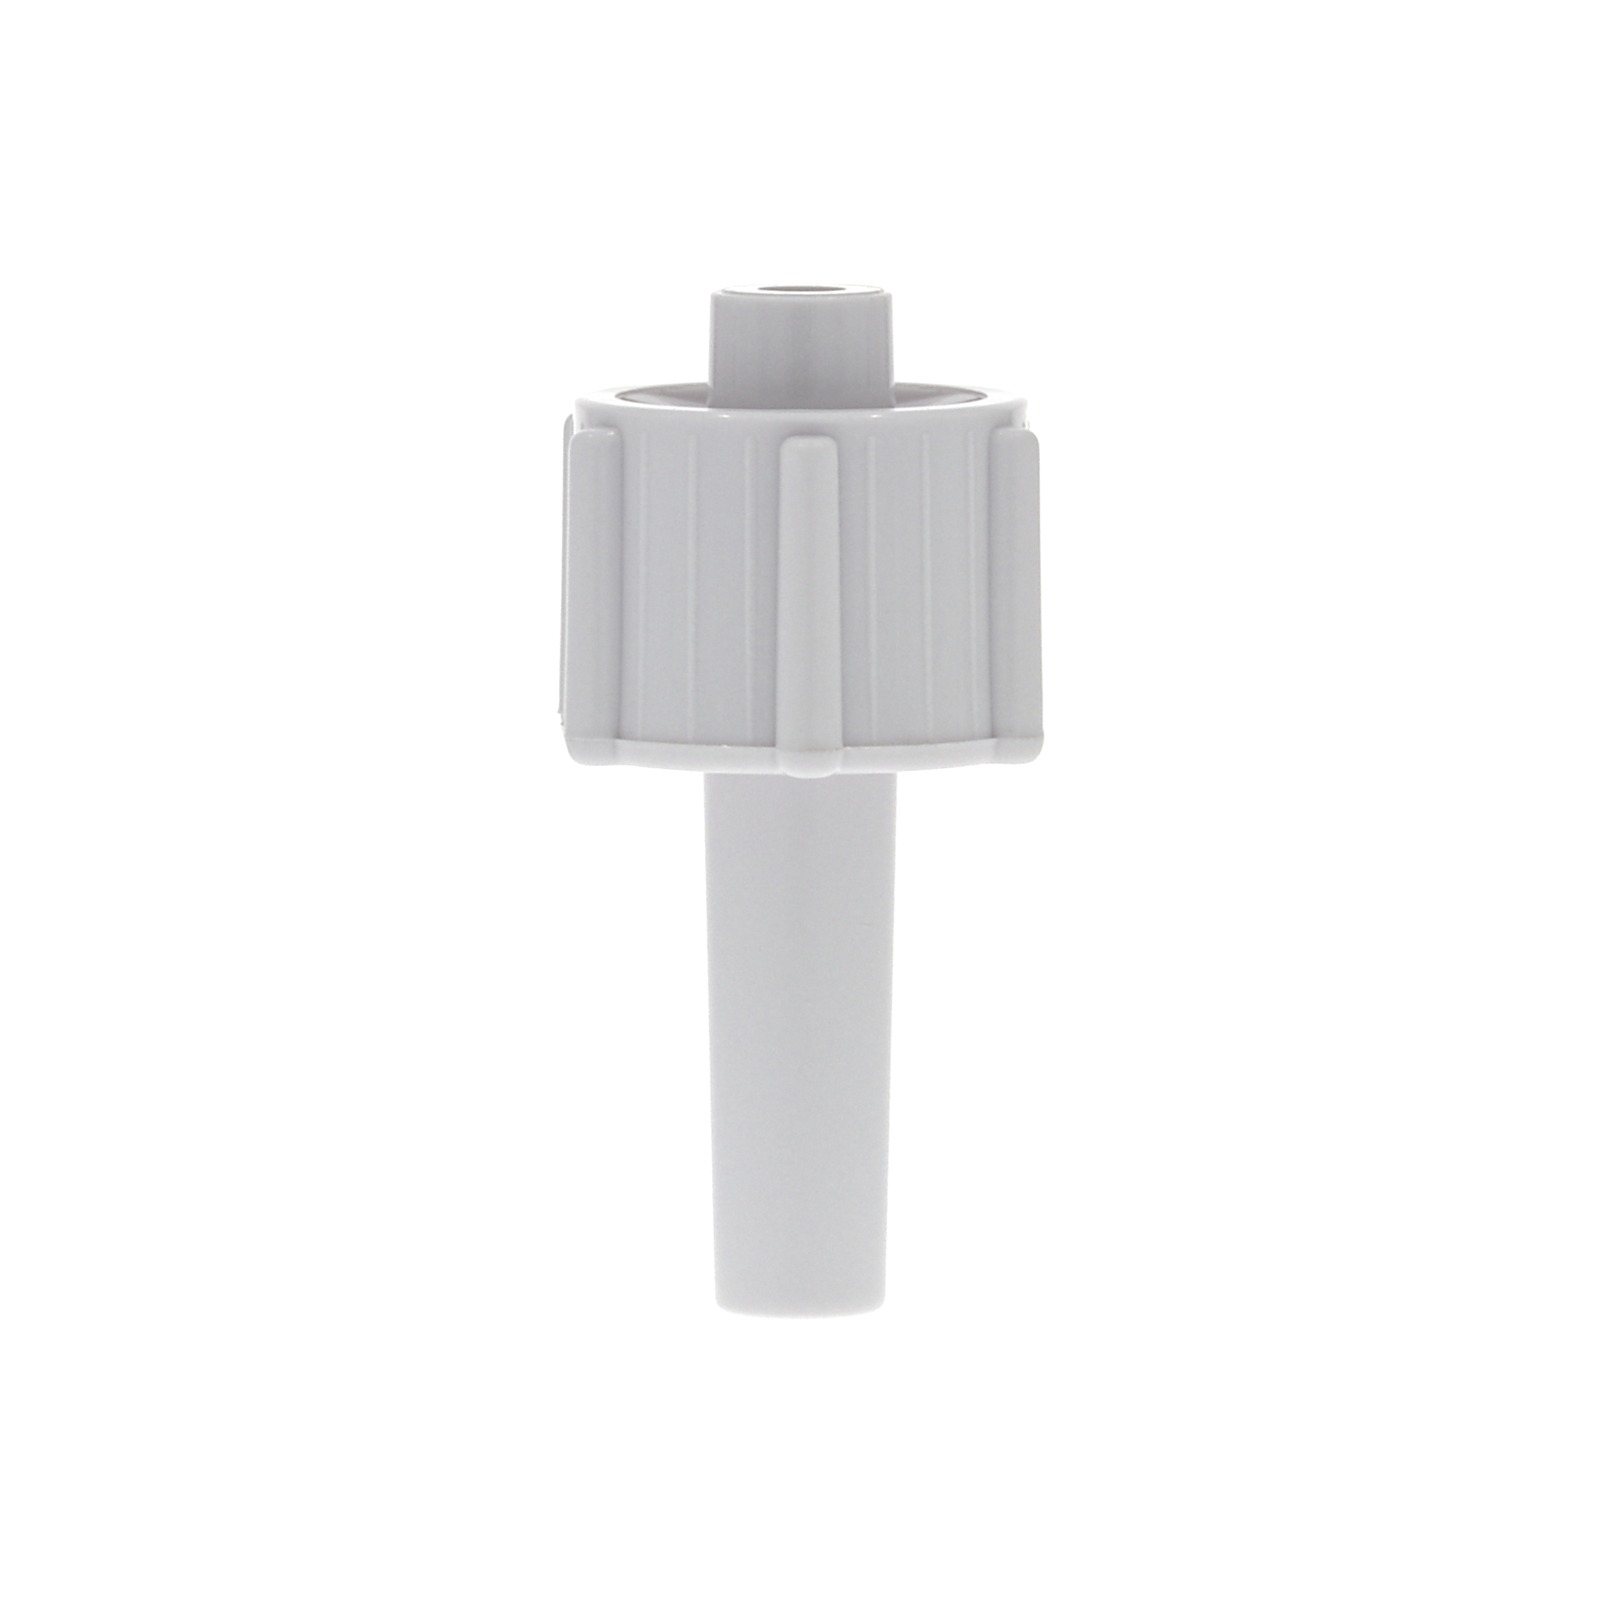 Male Luer Lock Connector White